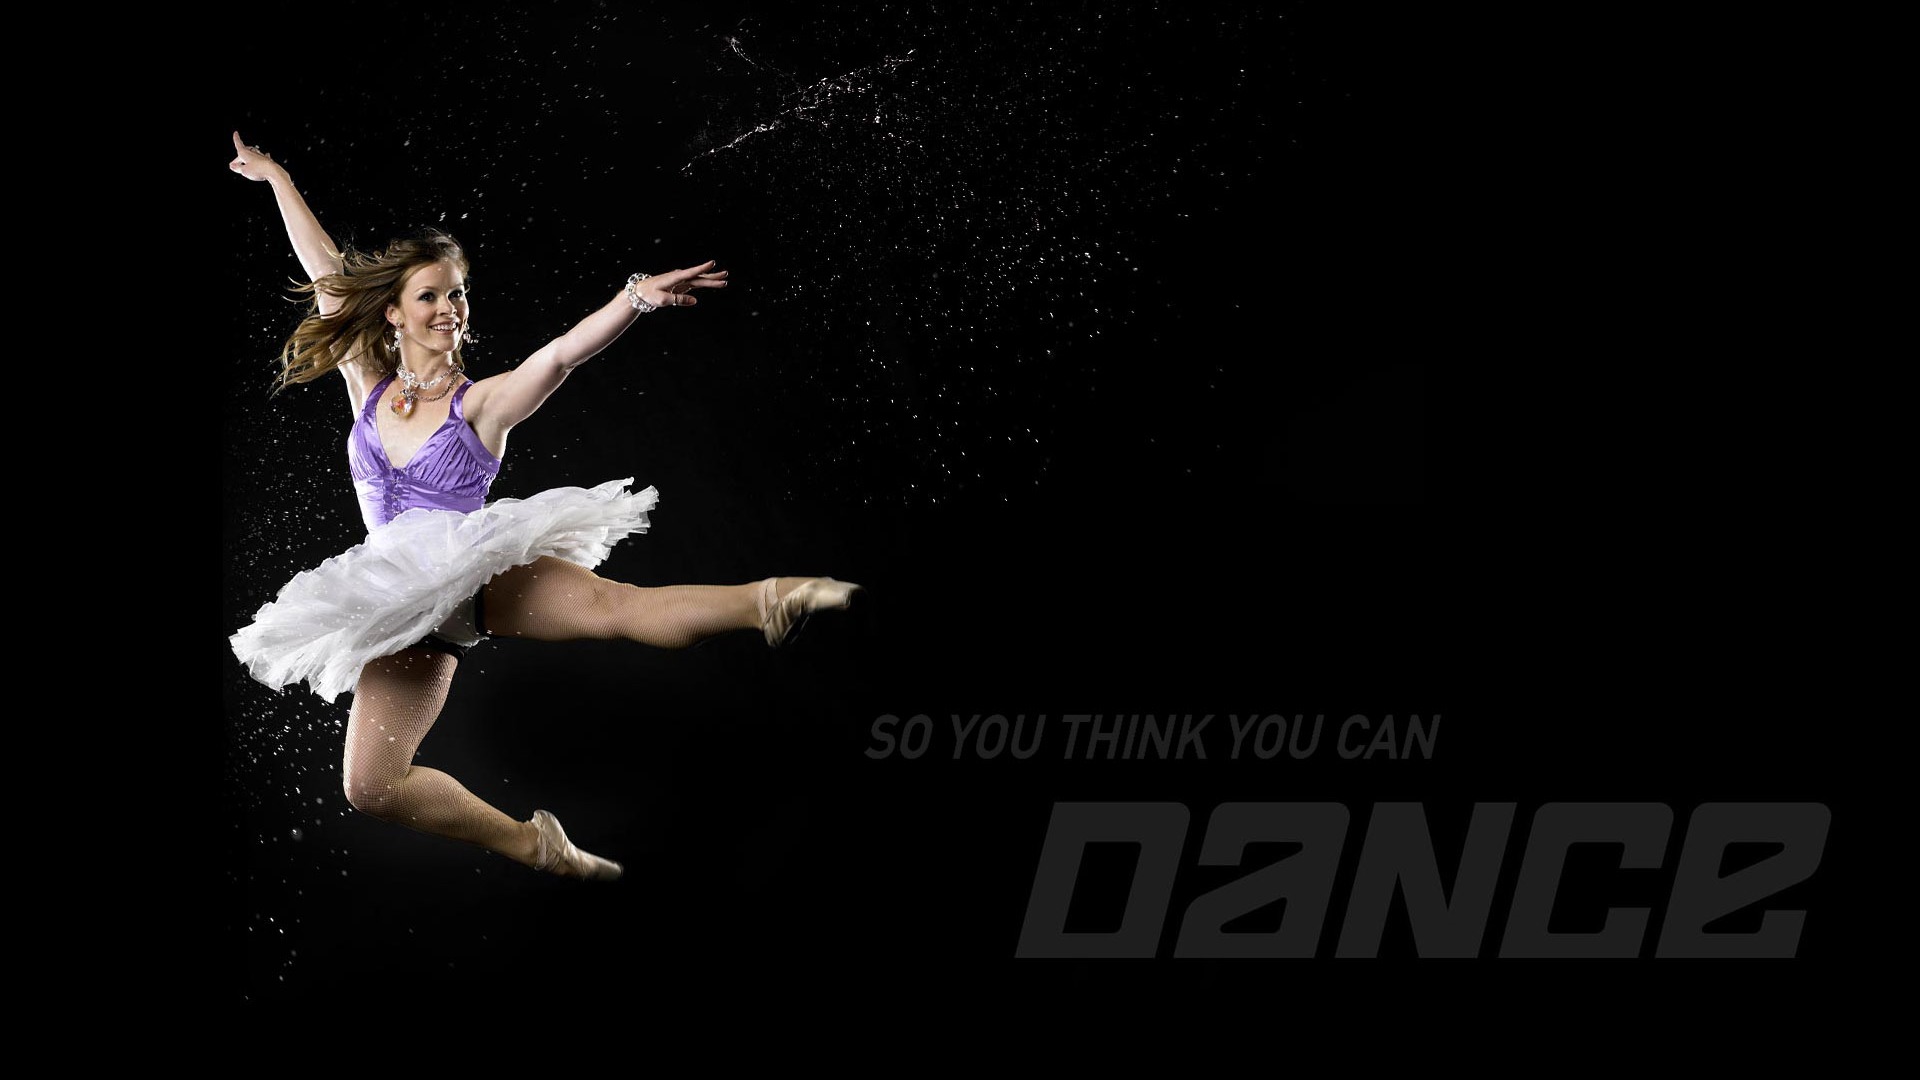 So You Think You Can Dance Wallpaper (1) #15 - 1920x1080